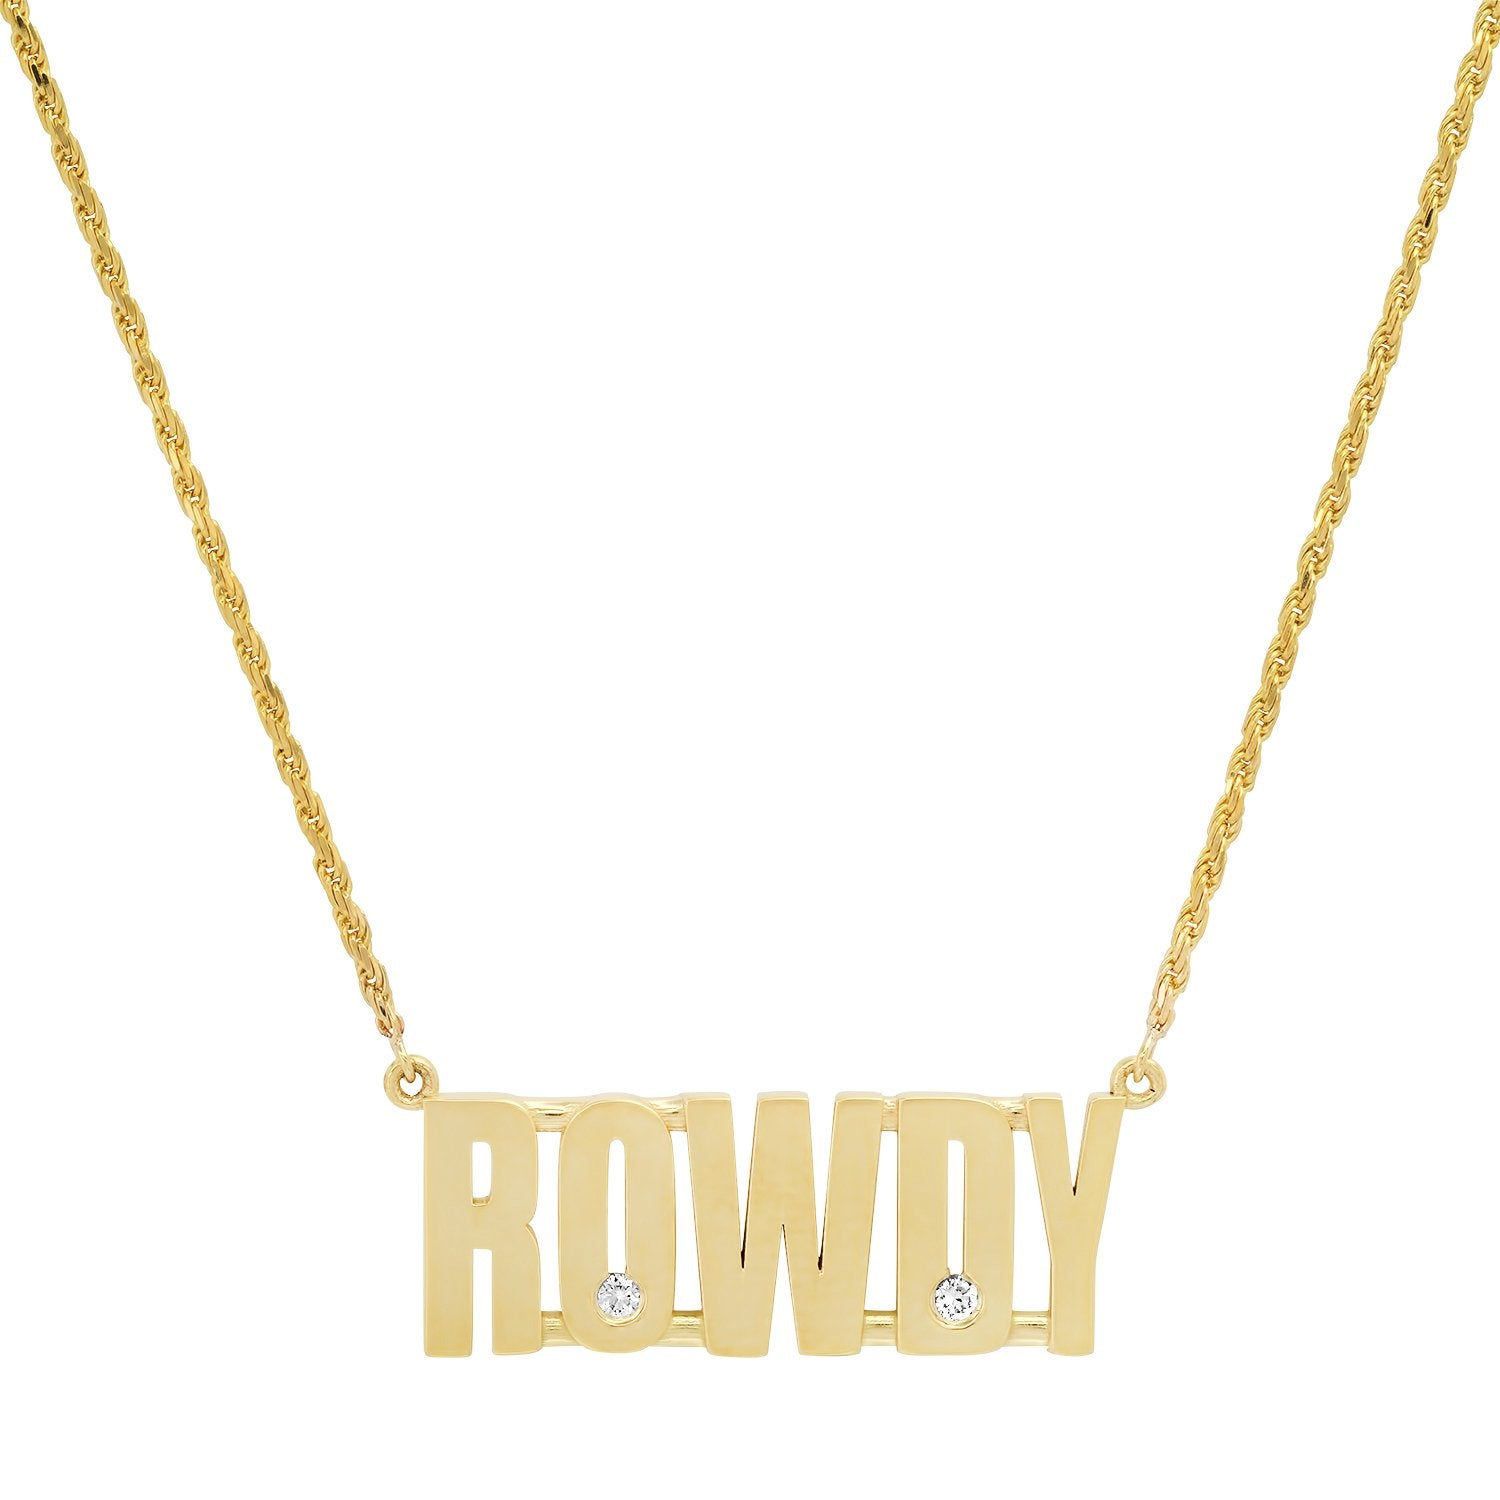 Rowdy Necklace